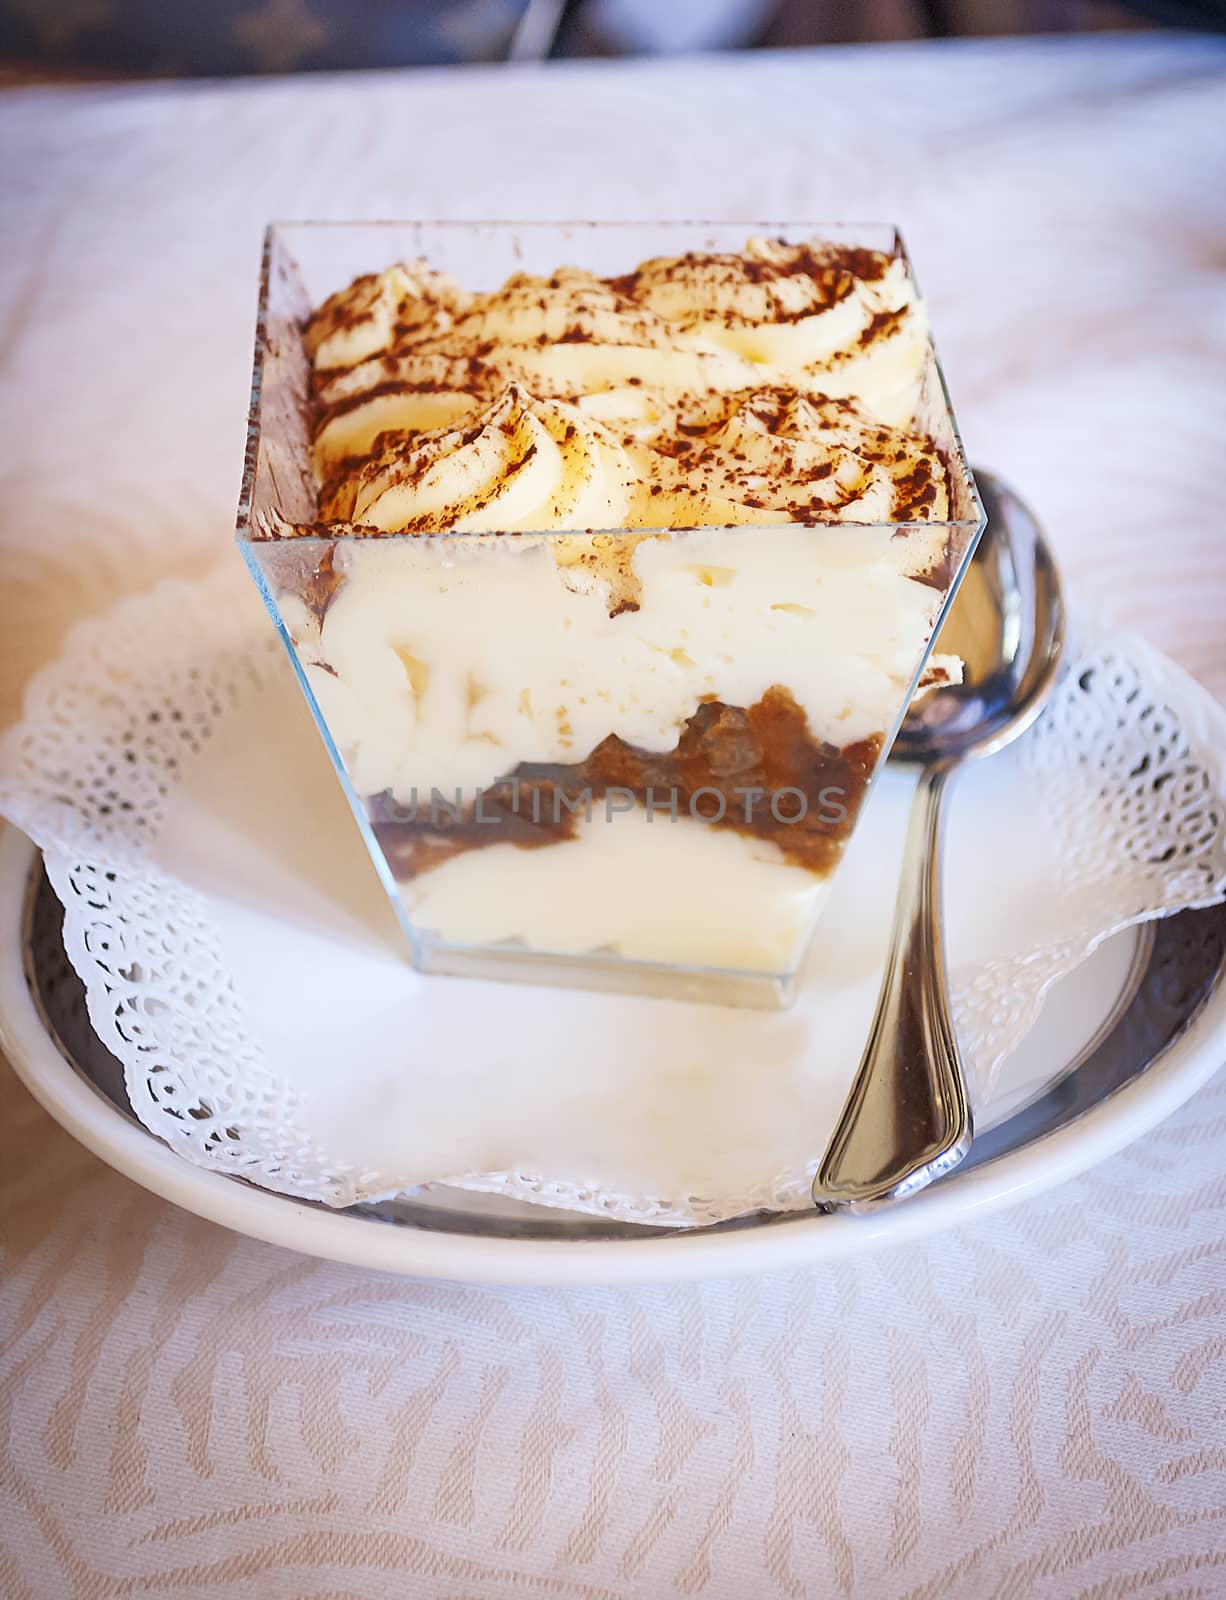 close-up view of a portion of Italian tiramisu made with mascarpone cheese, coffee and savoiardi biscuits